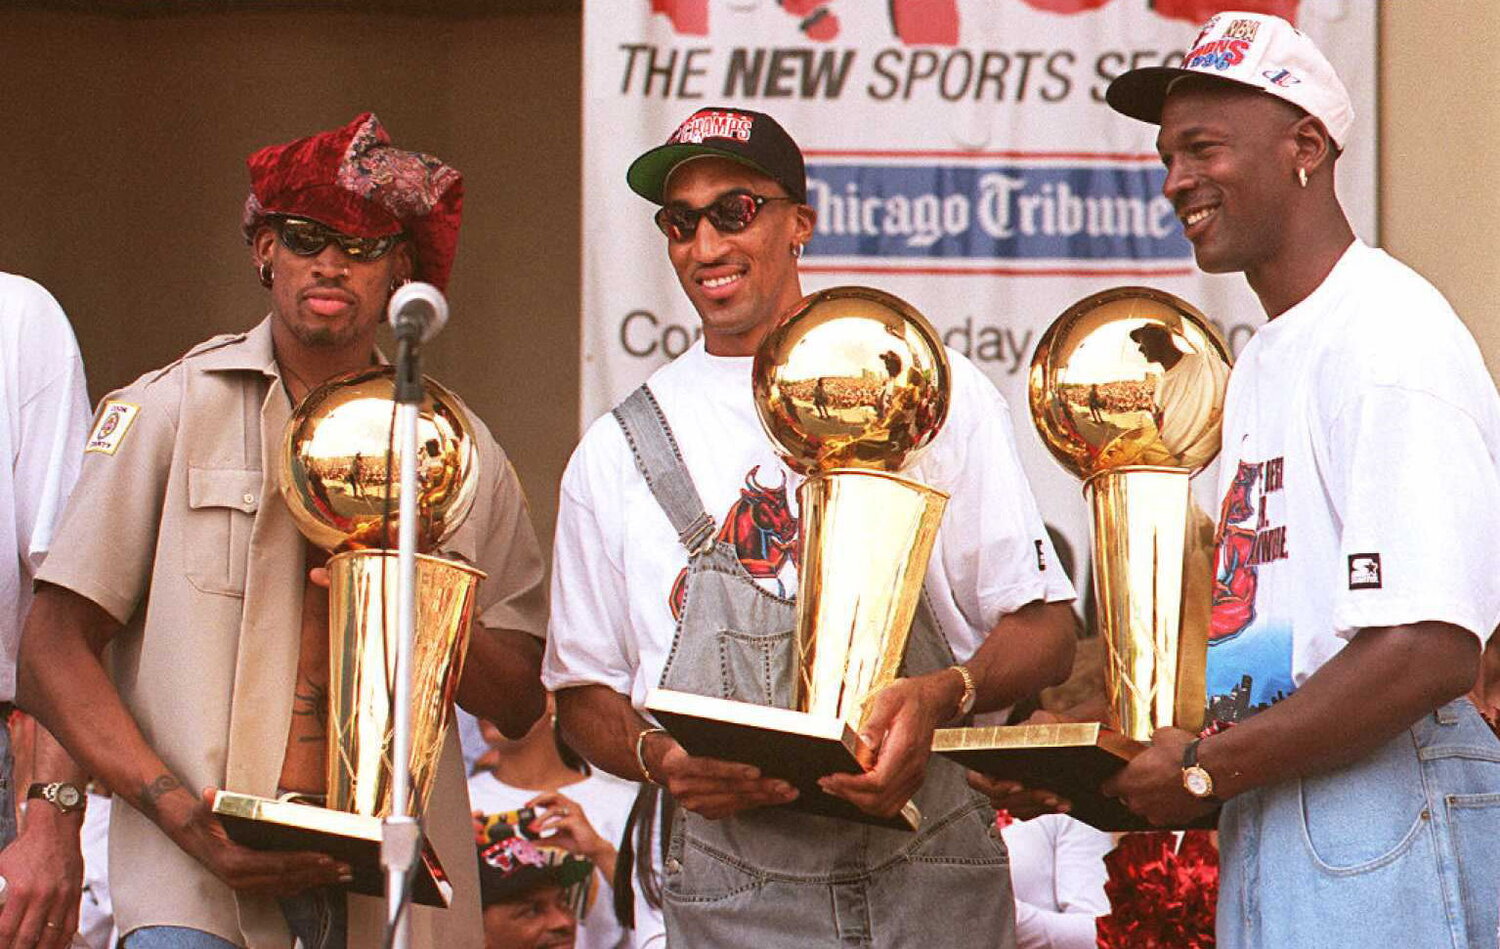 Dennis Rodman, Scottie Pippen, and Michael Jordan hold Larry O'Brien National Championship trophies at a rally in Chicago in June, 1996. Photo: Getty Images/Tim Zielenbach